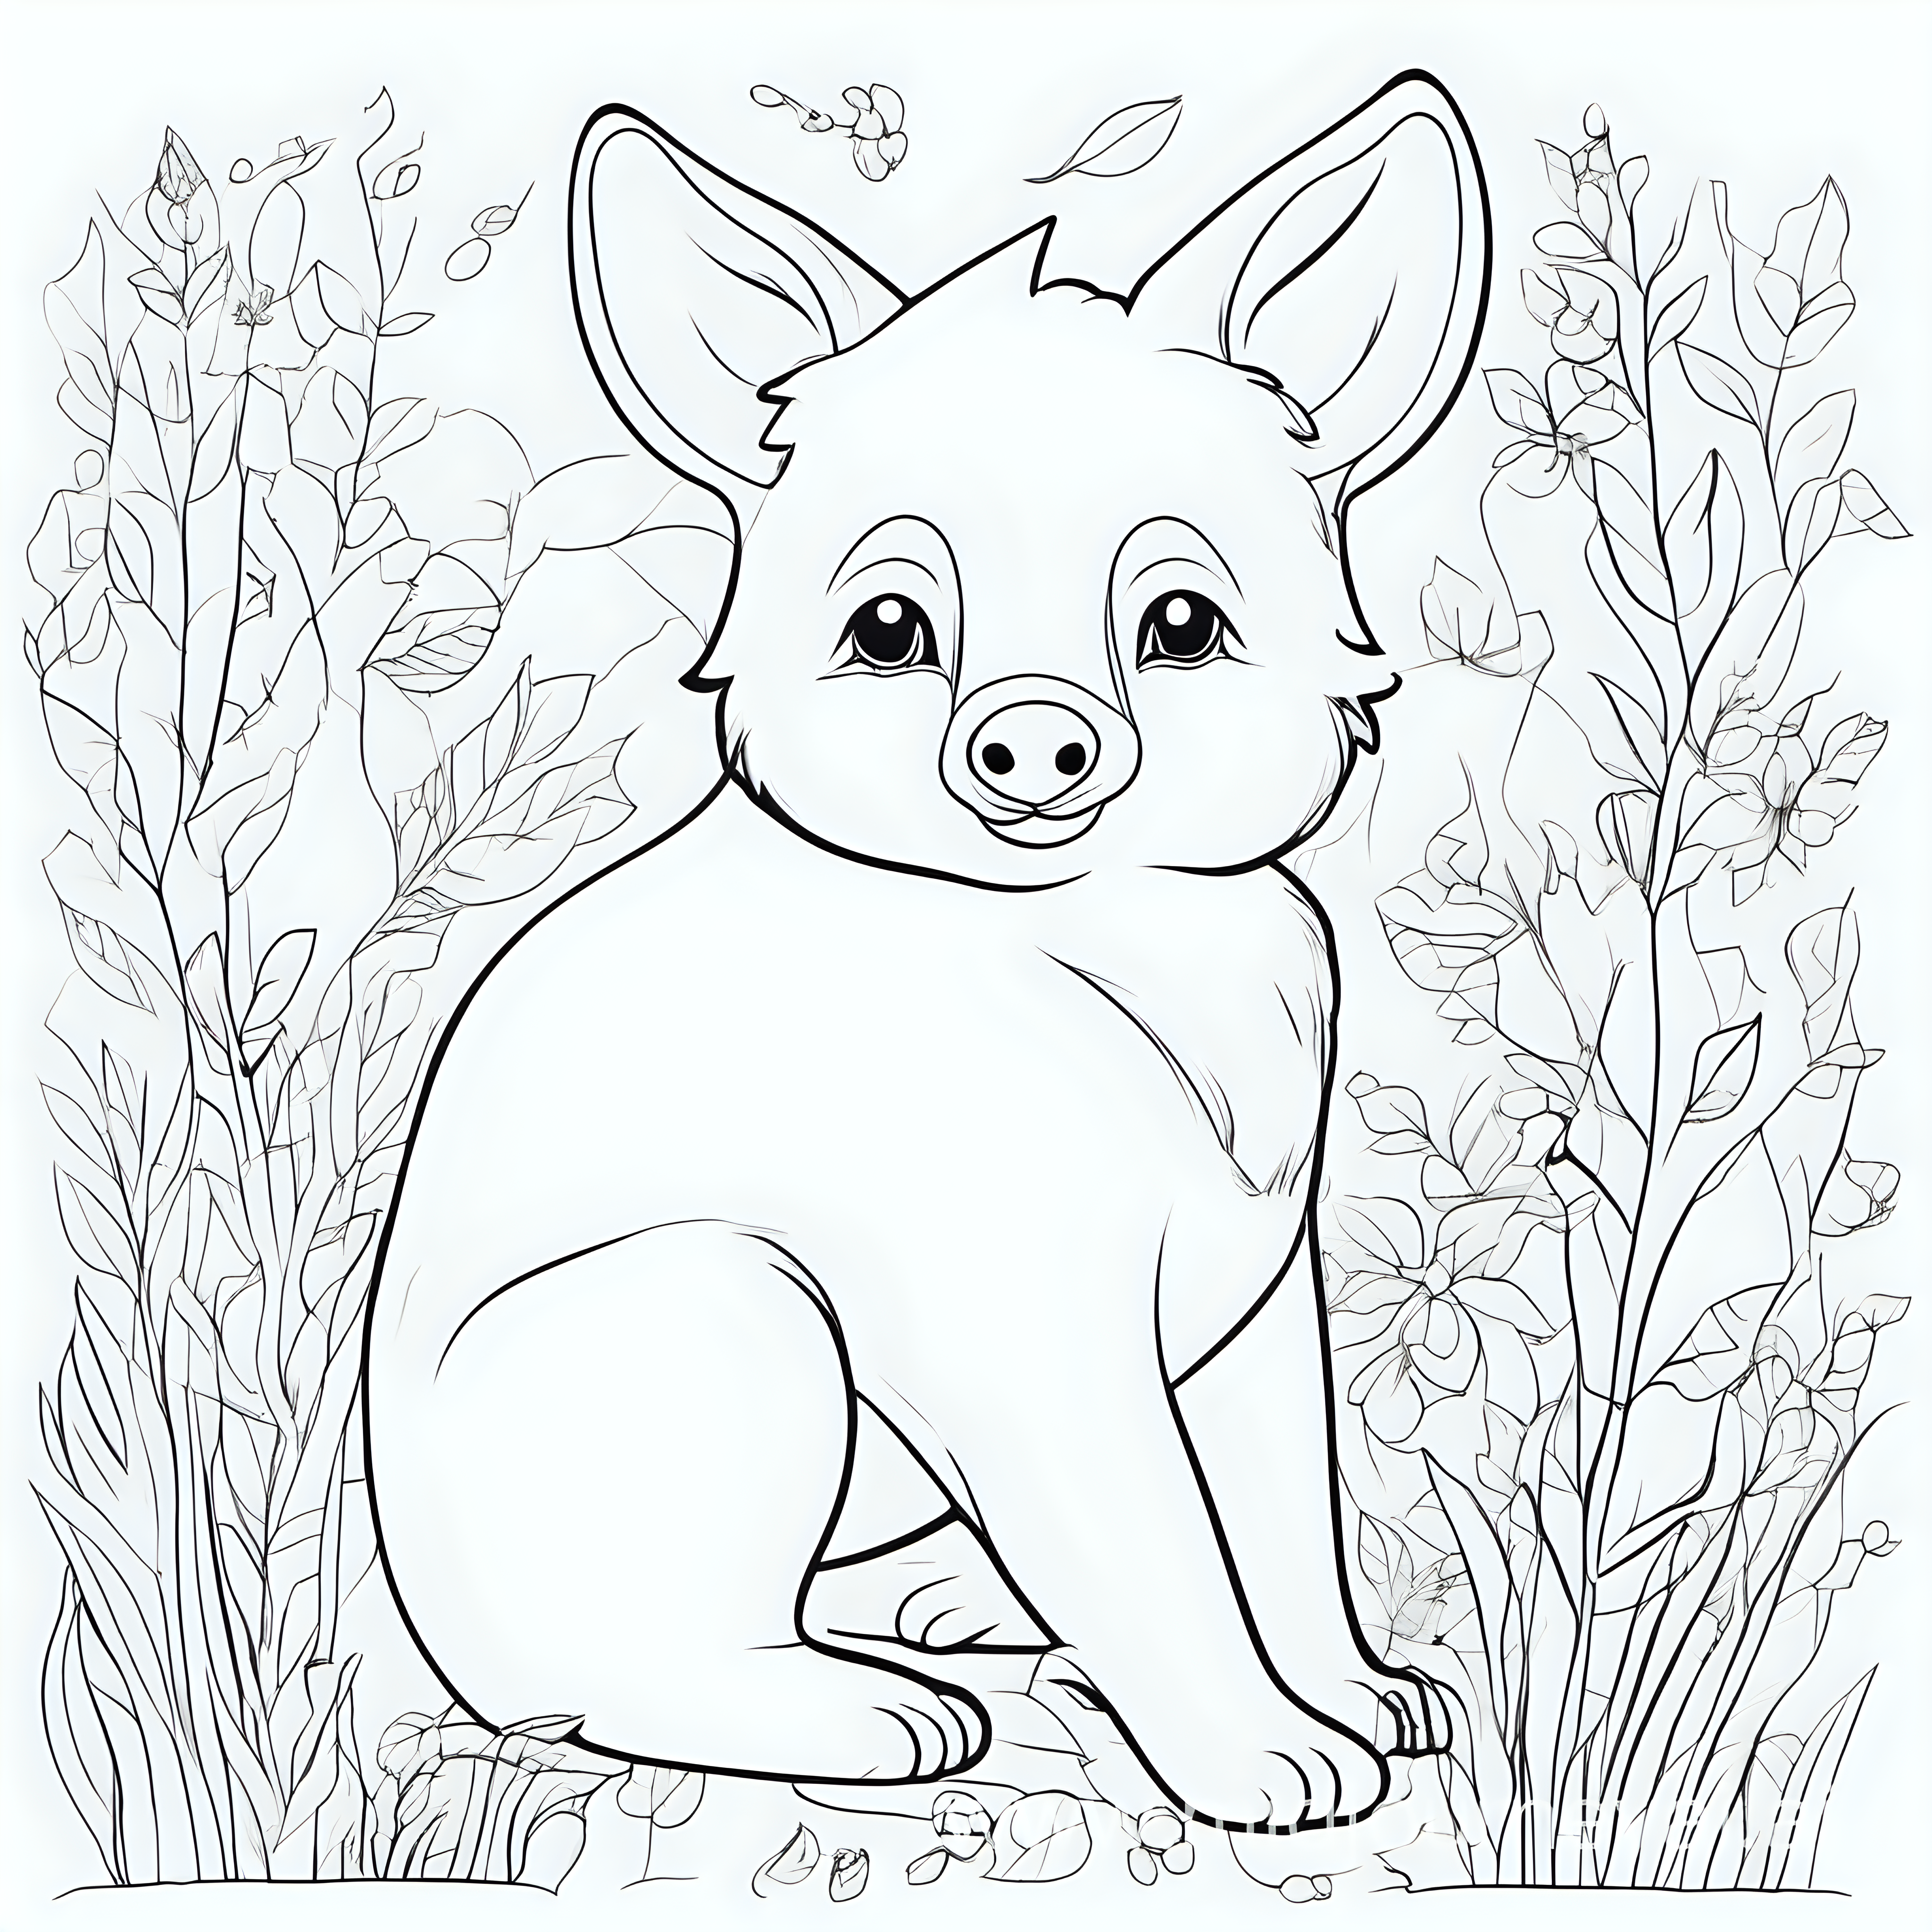 draw unique cute animals with only the outline